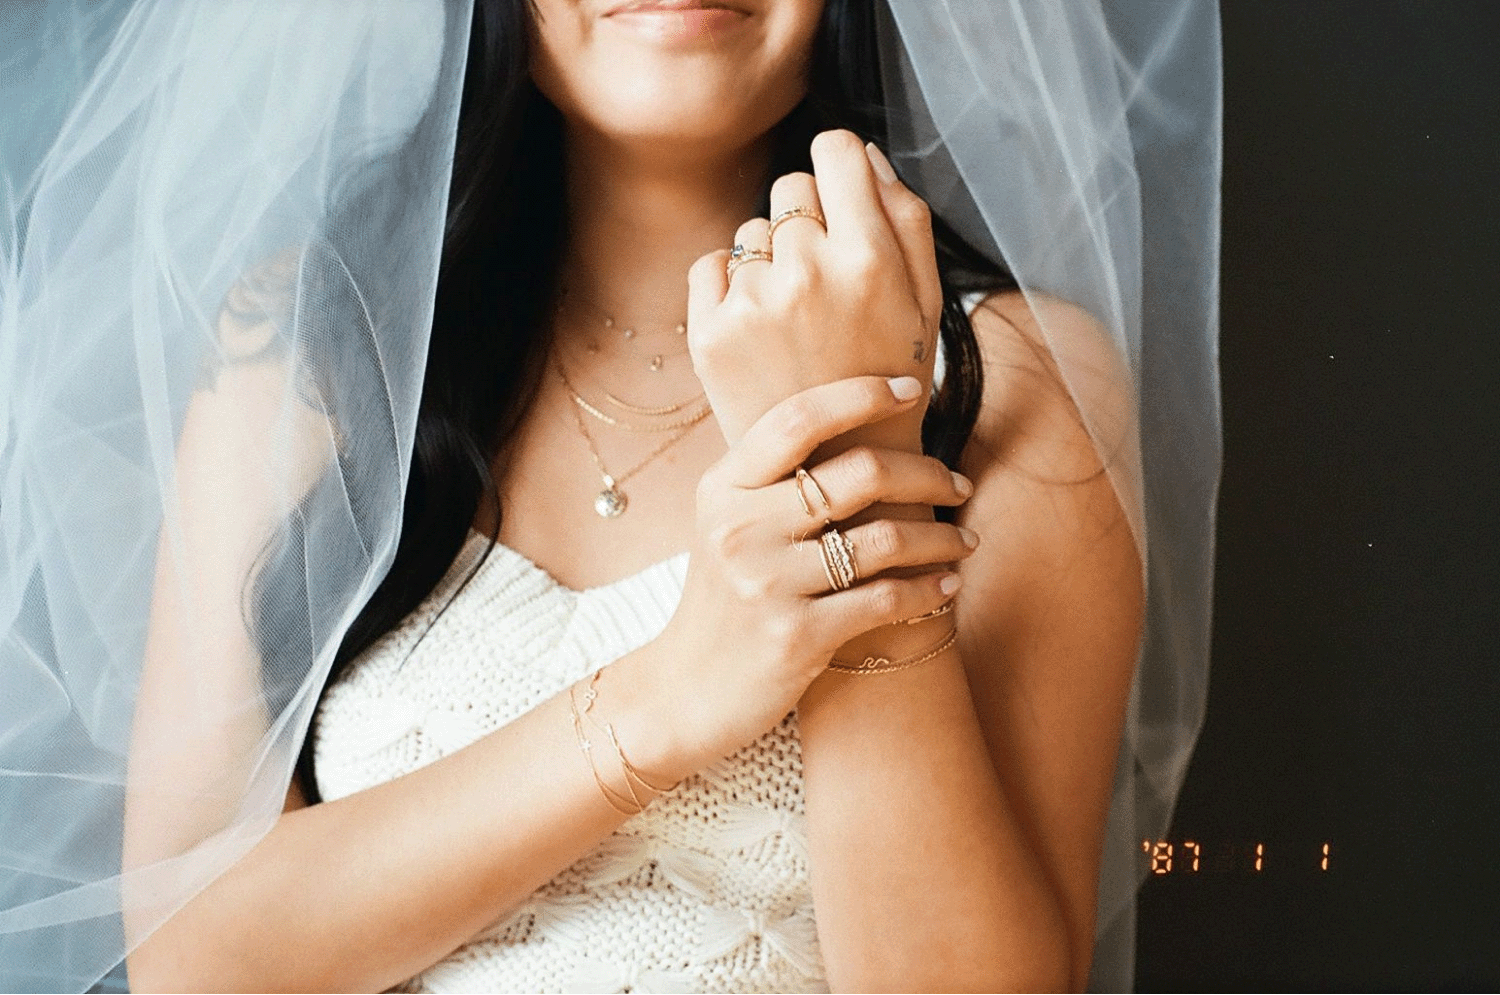 A close-up of a girl wearing a veil. She is showing off all the gold jewelry she is wearing. Shot on 35mm film.